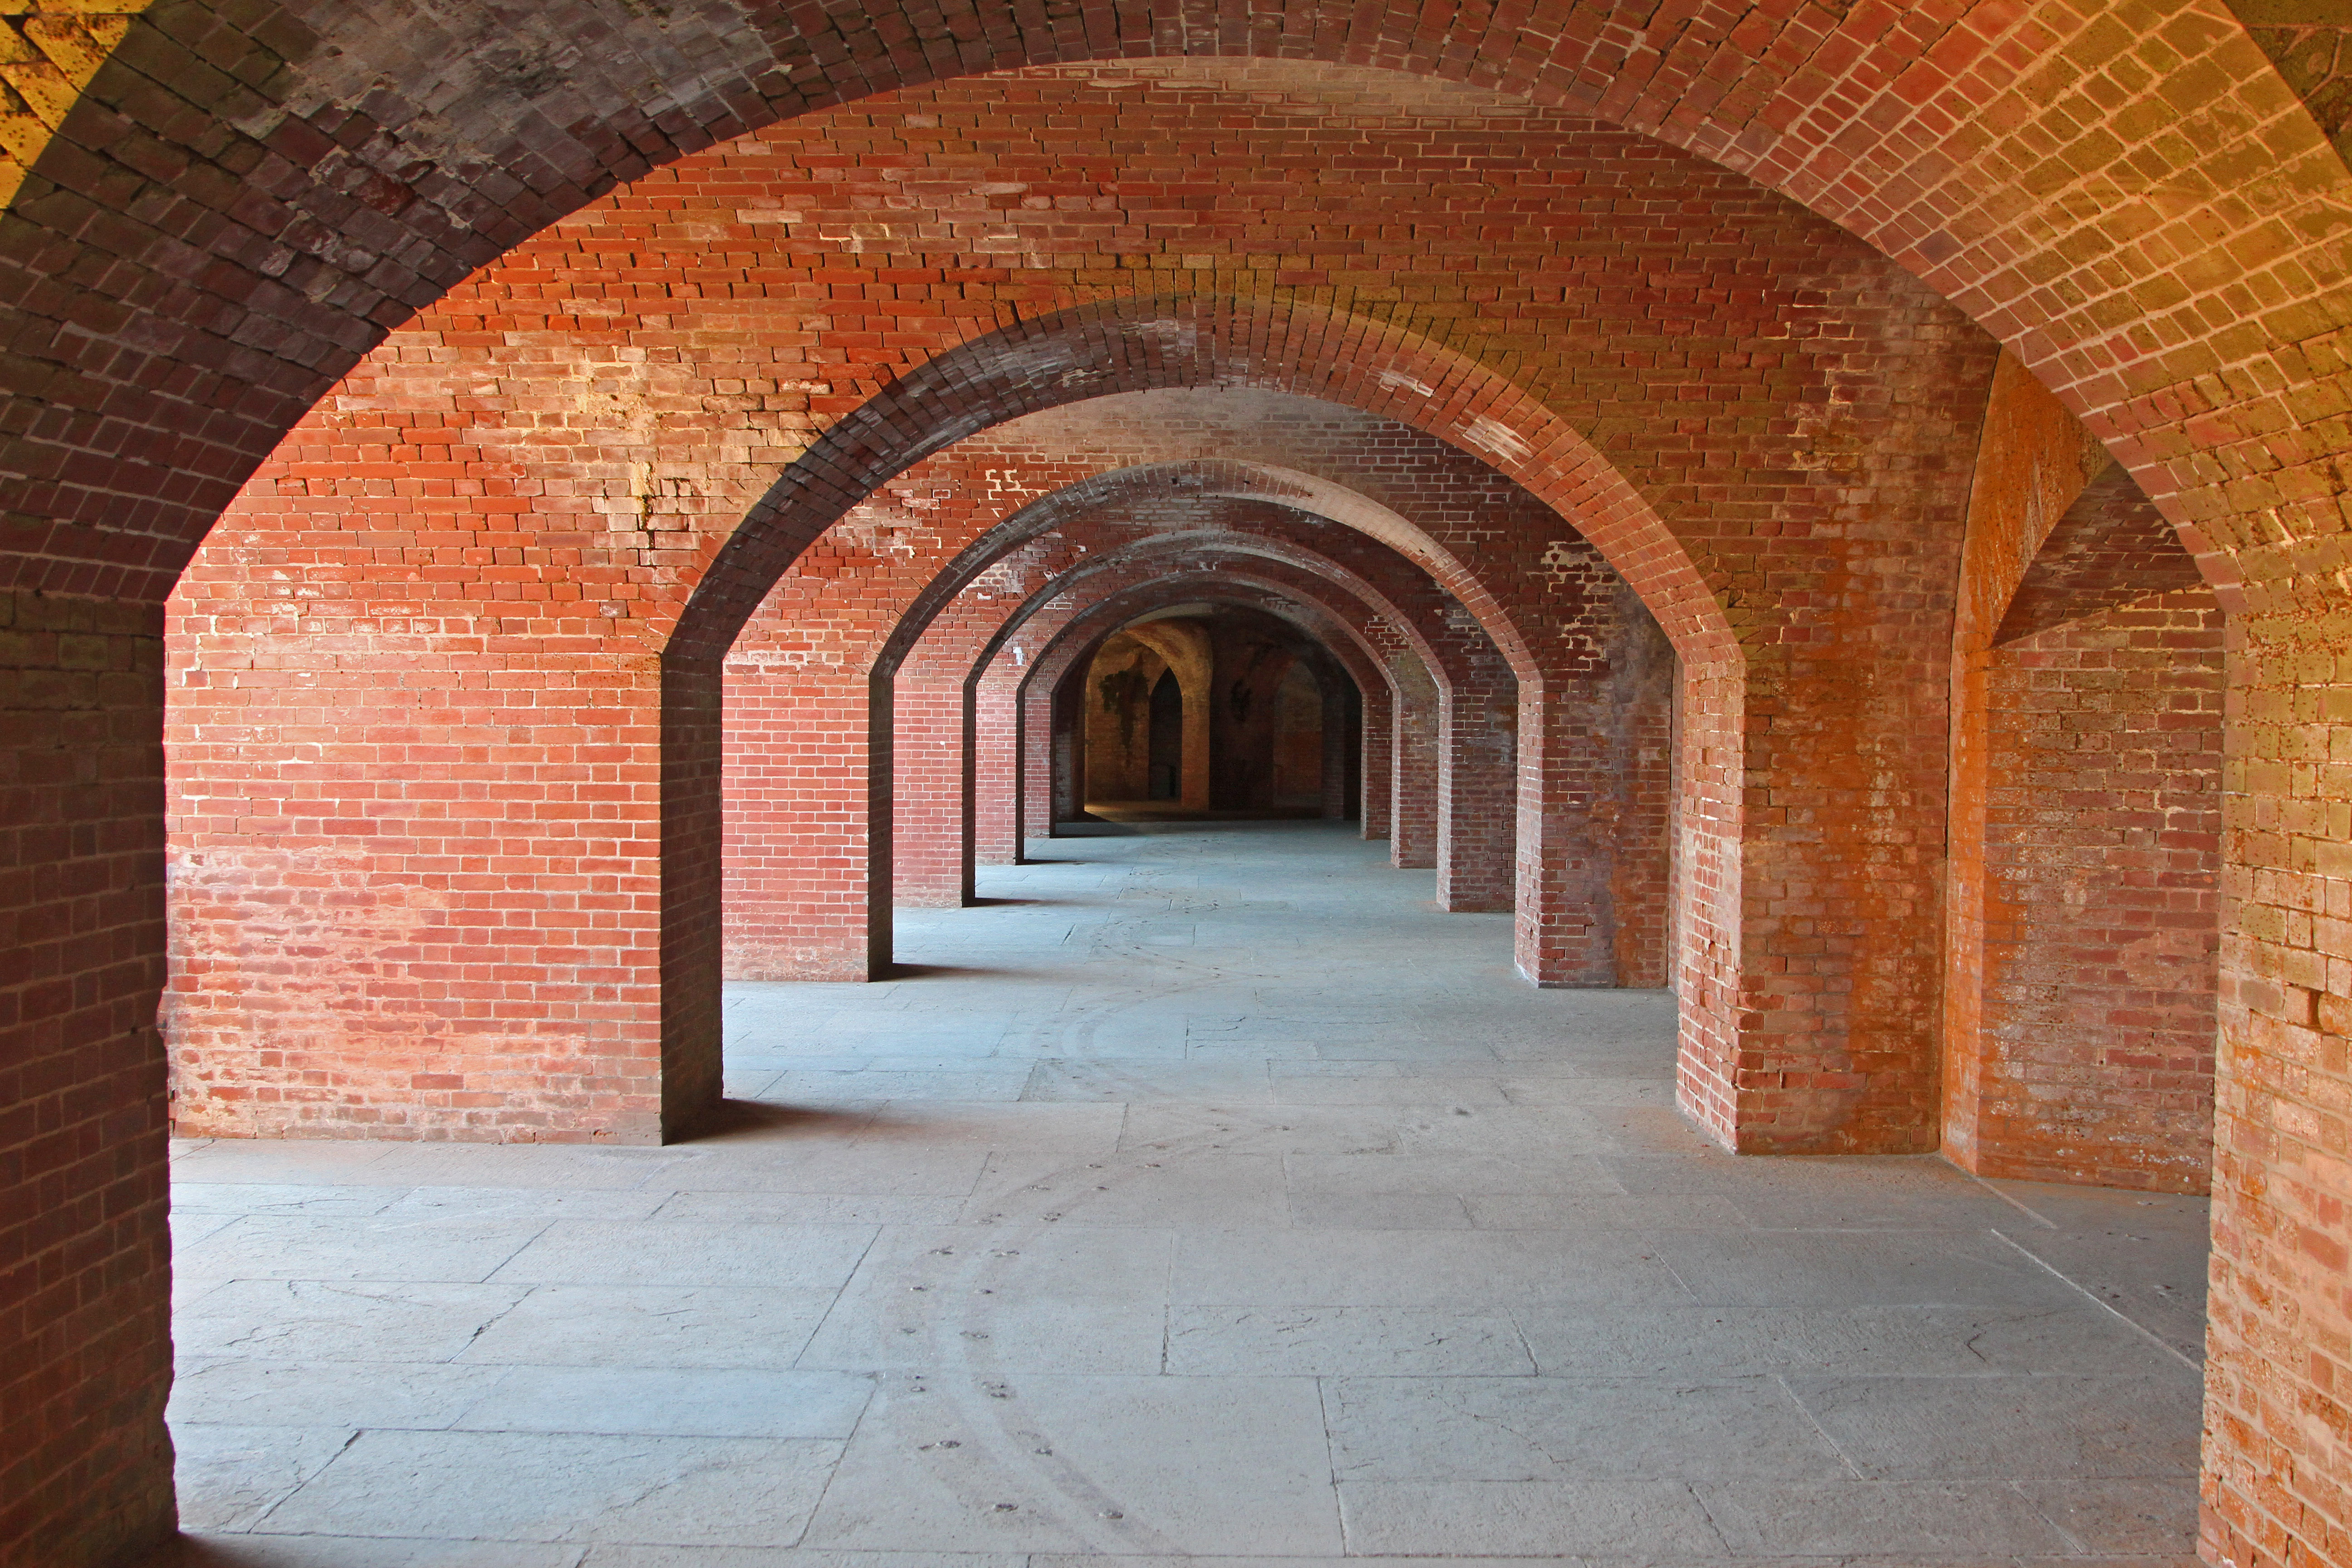 Arched red brick casemates extend into the distance at Fort Point.